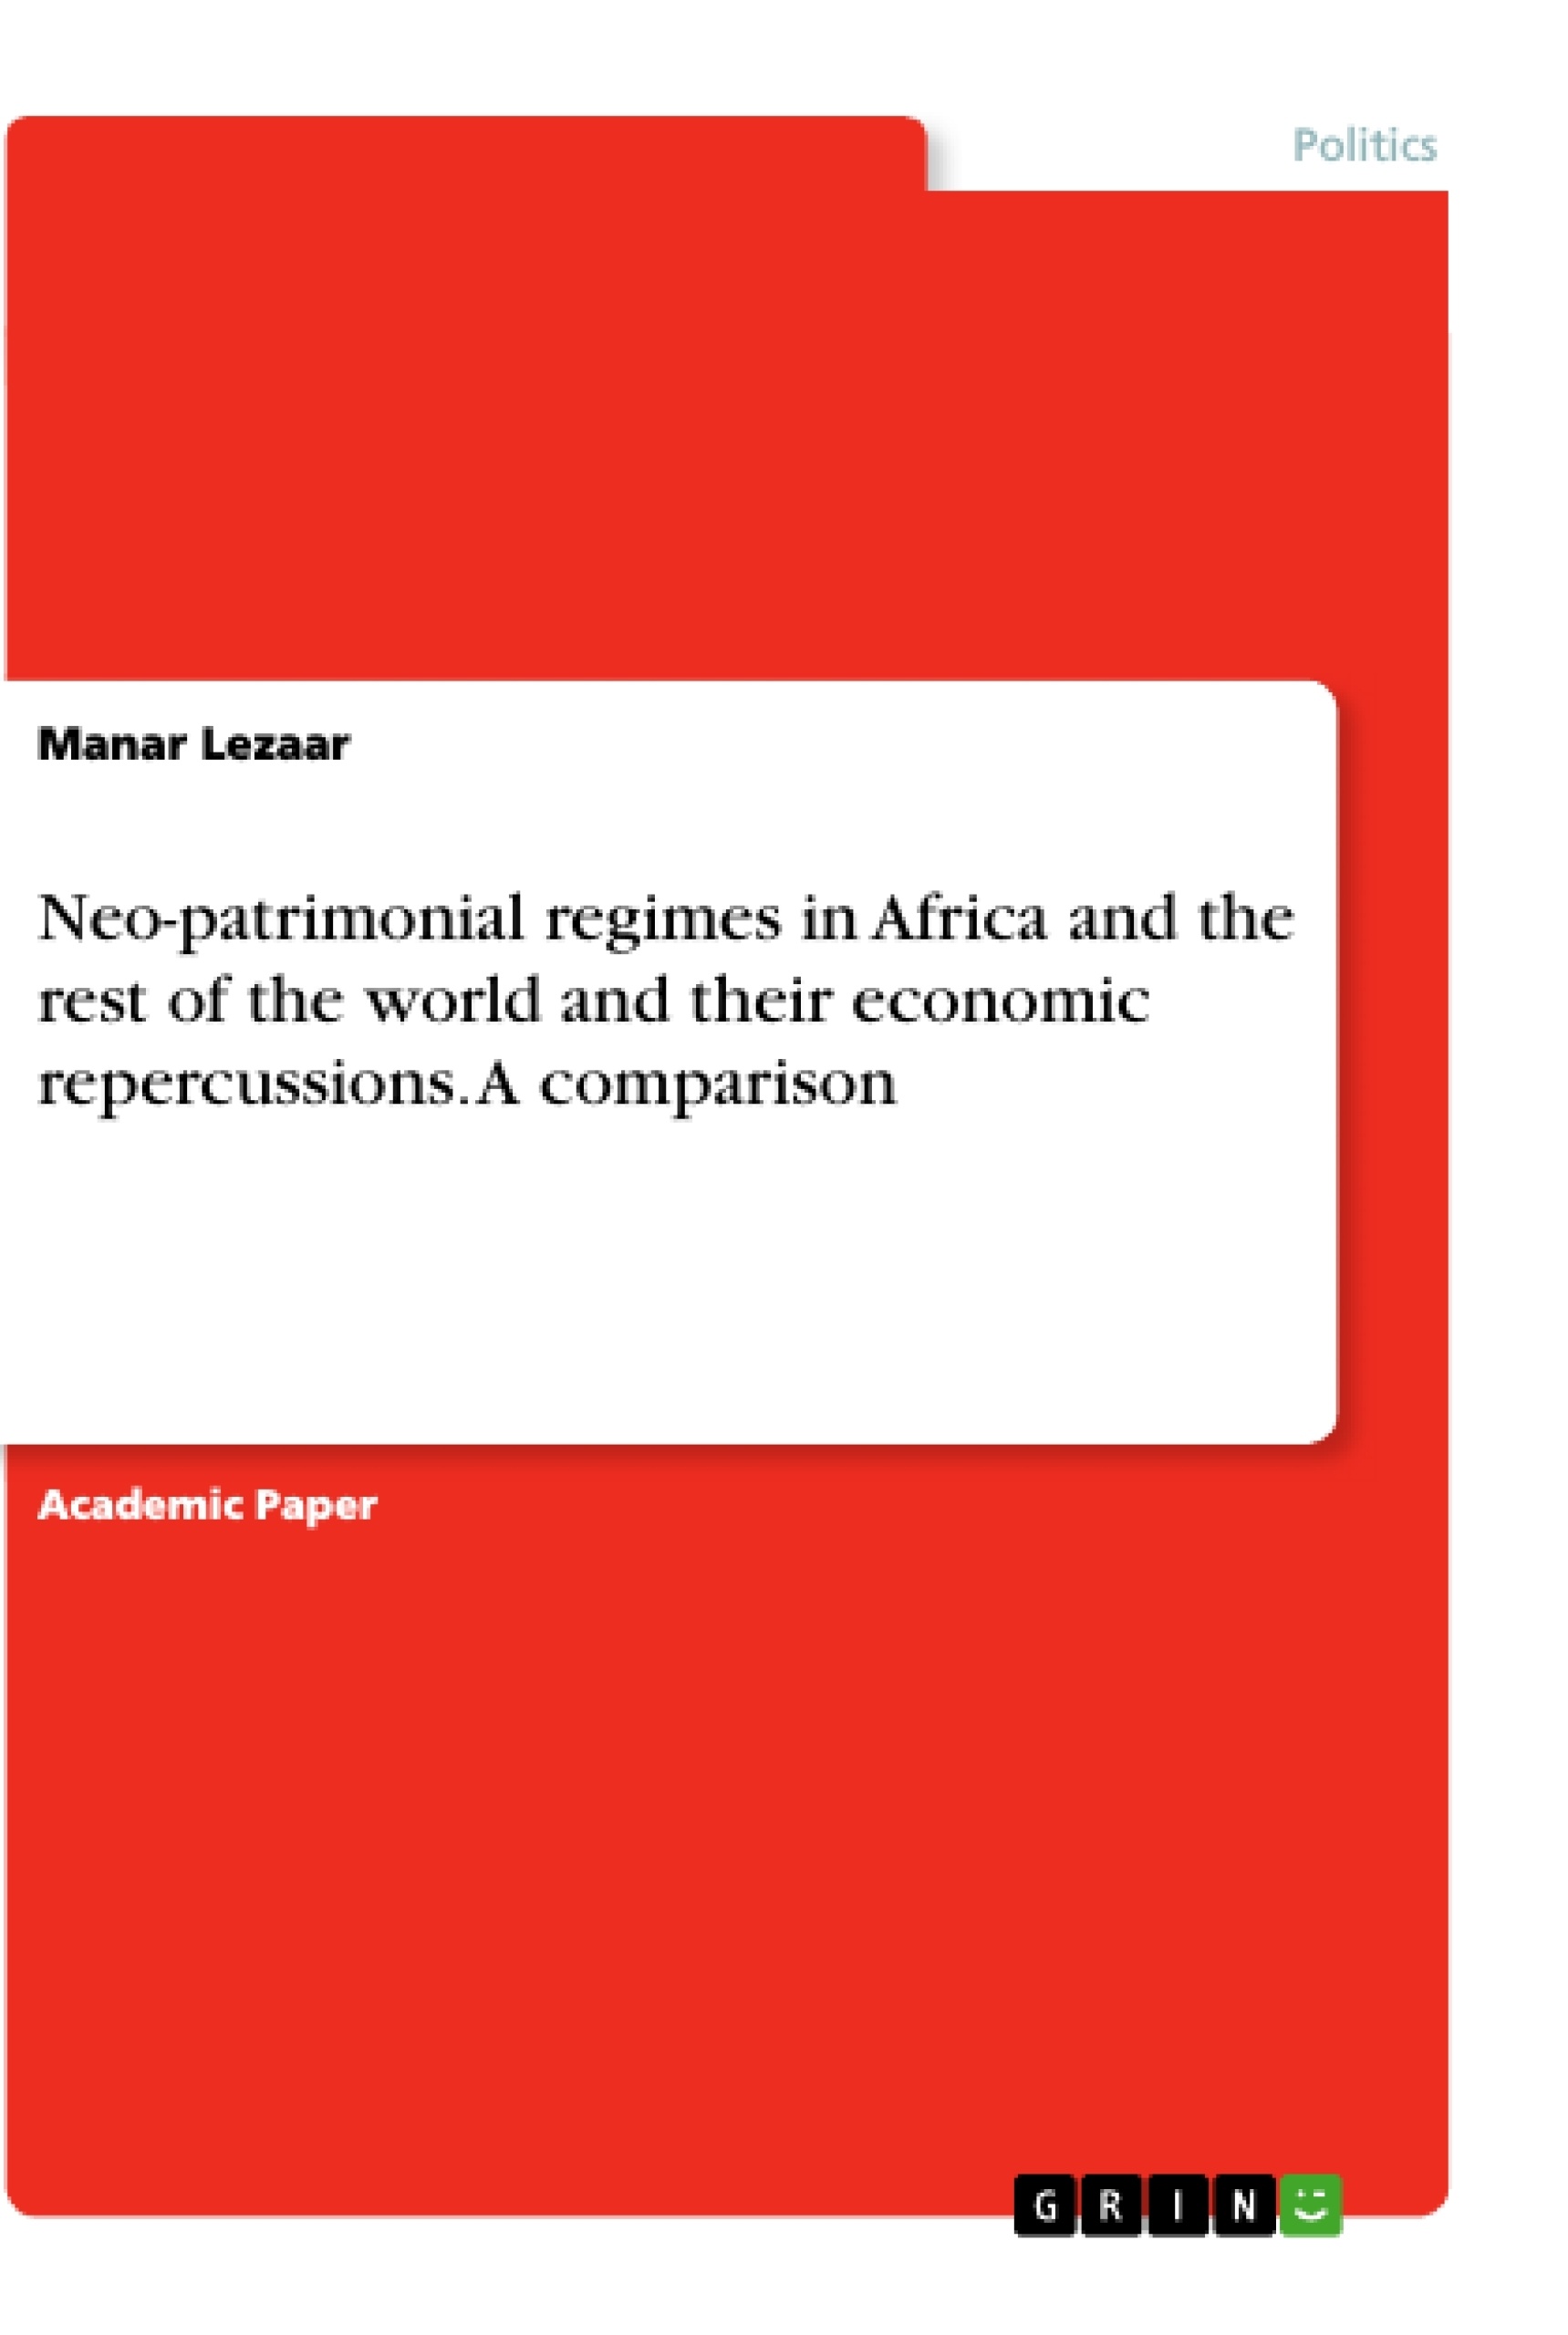 Título: Neo-patrimonial regimes in Africa and the rest of the world and their economic repercussions. A comparison